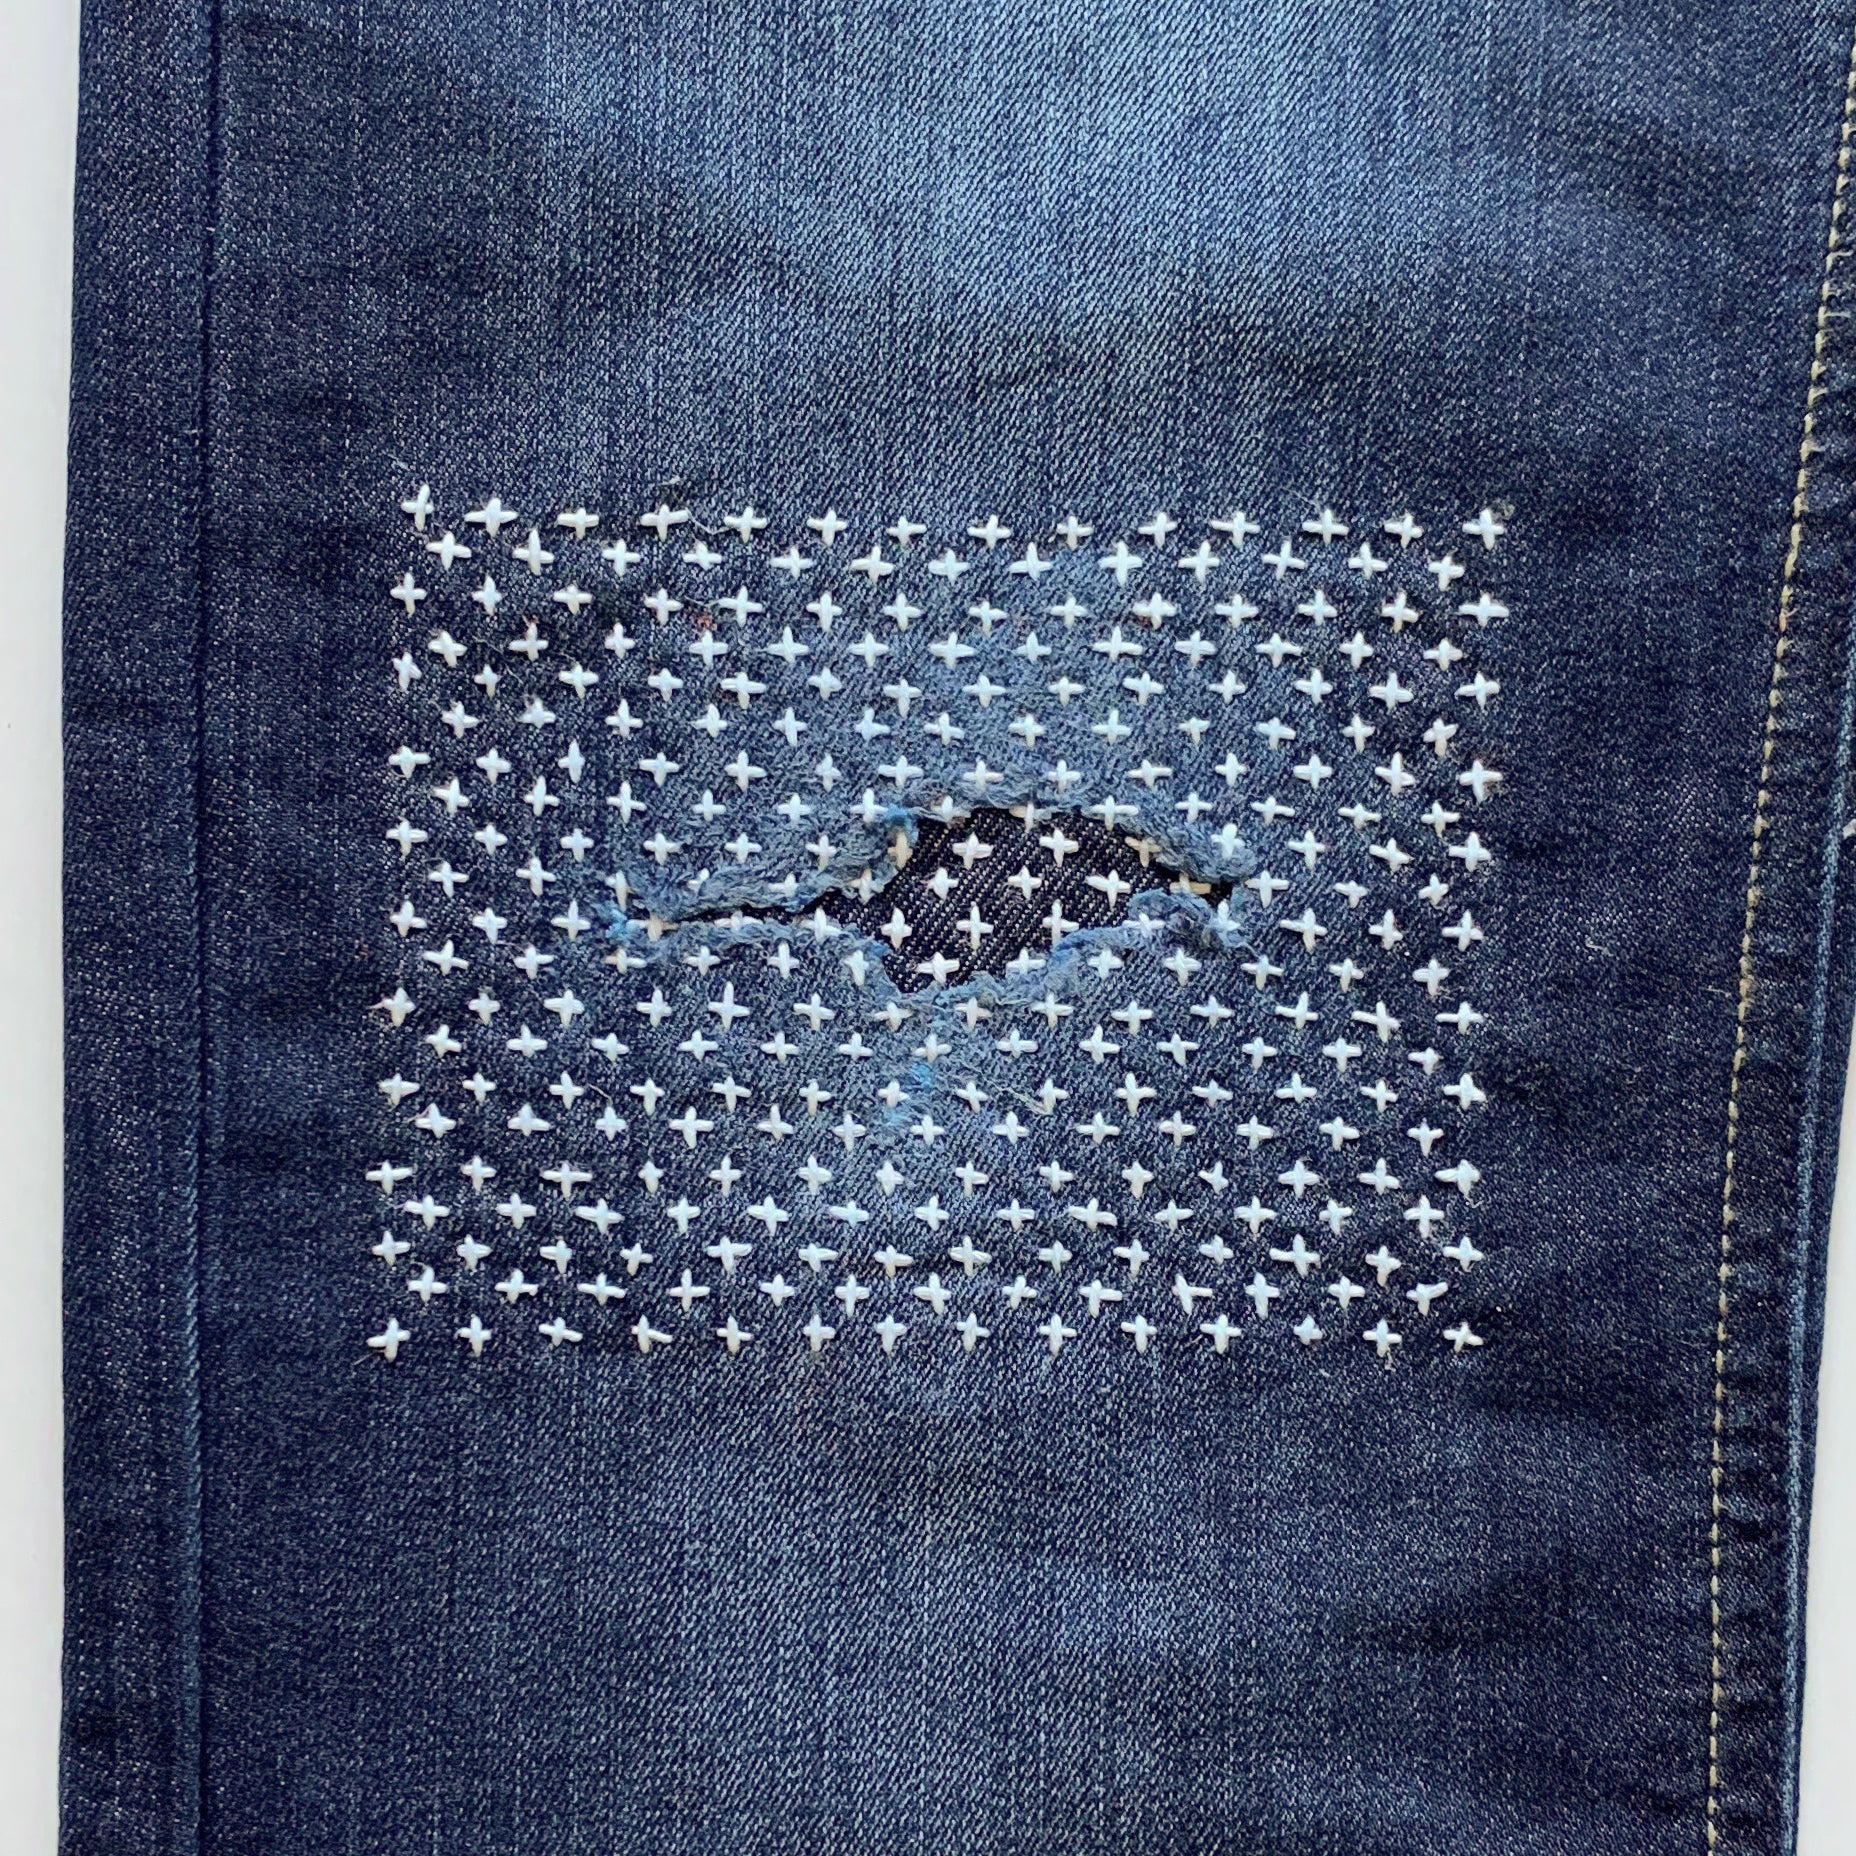 Two jeans repair patches | Iron on dark blue jeans patch